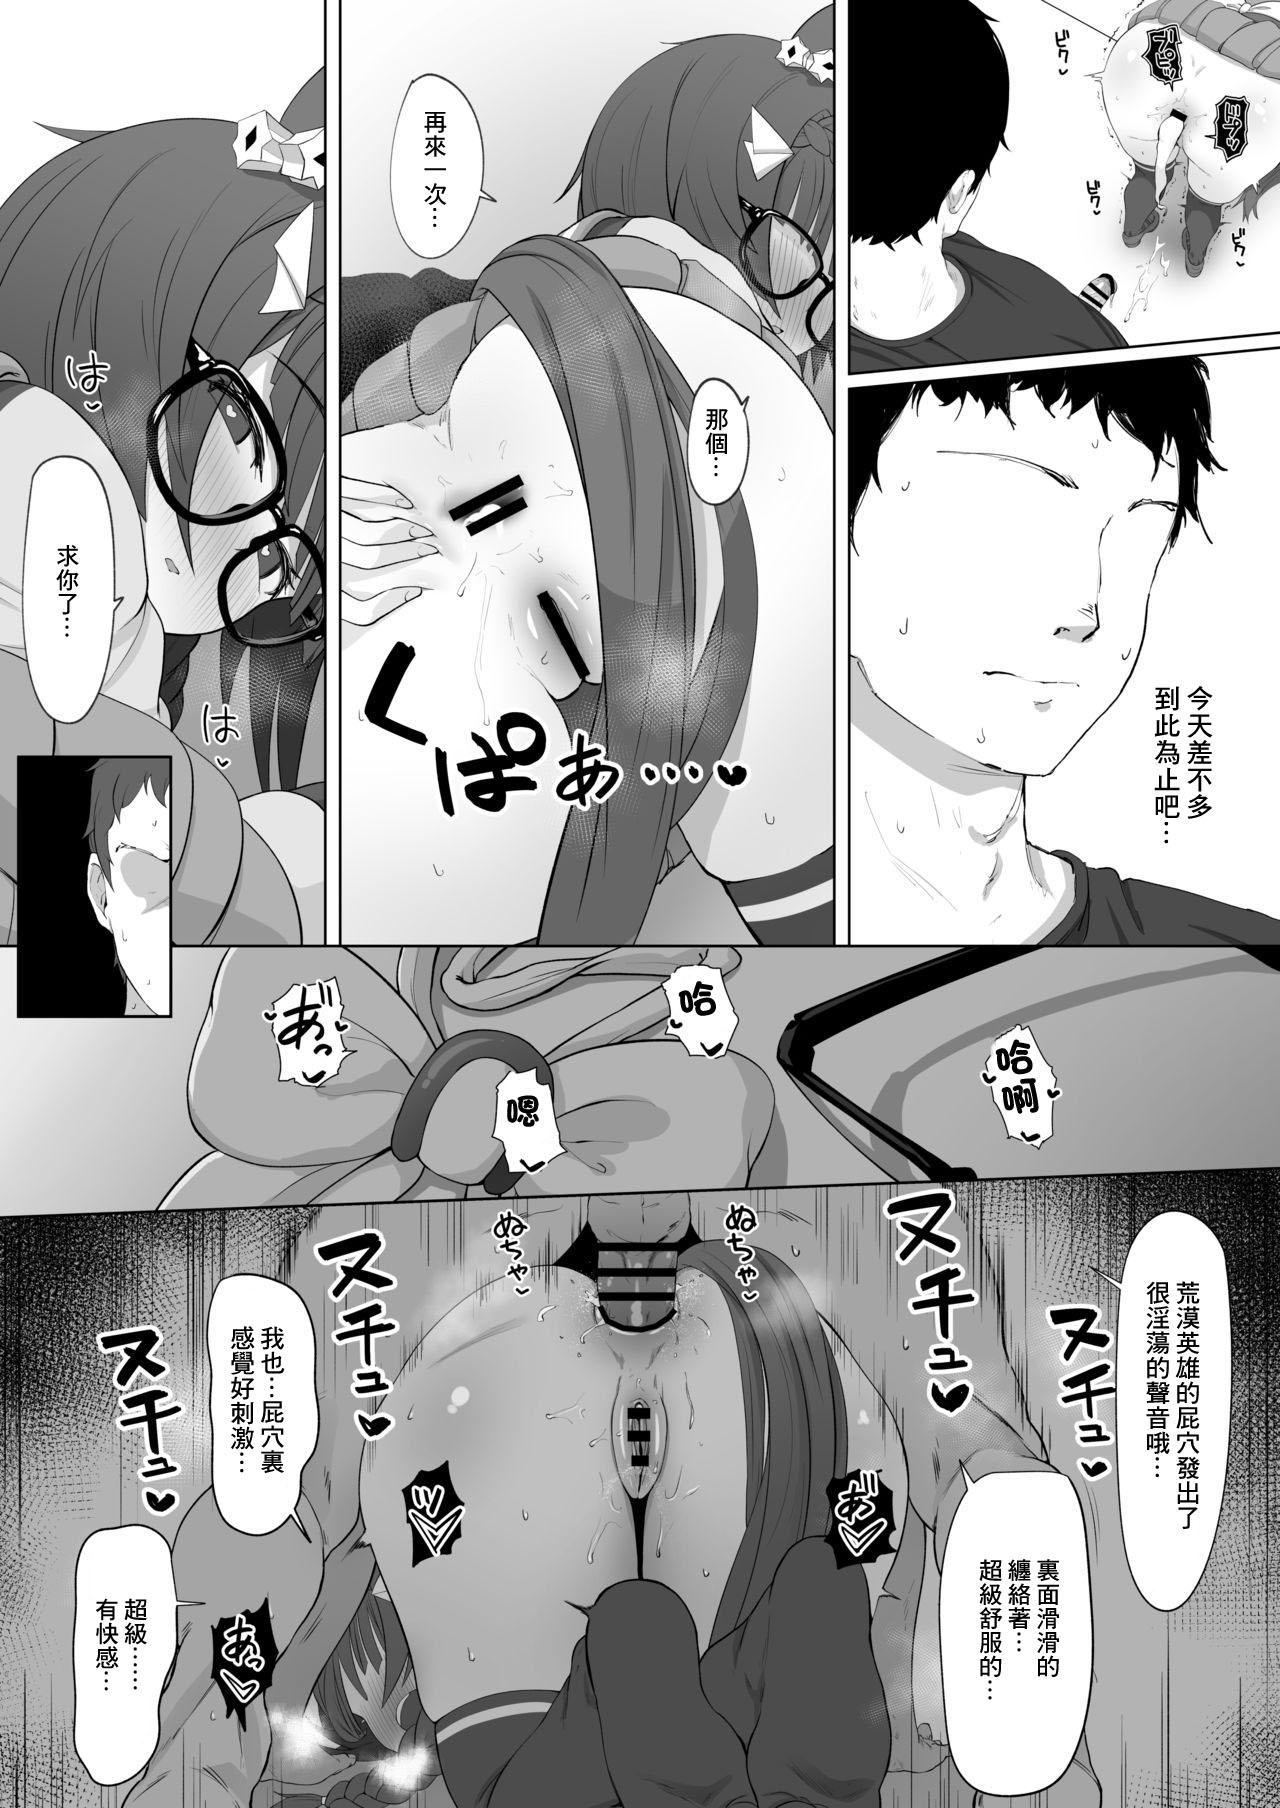 Free Fuck Clips Rob Roy - Uma musume pretty derby Girl Fucked Hard - Page 7